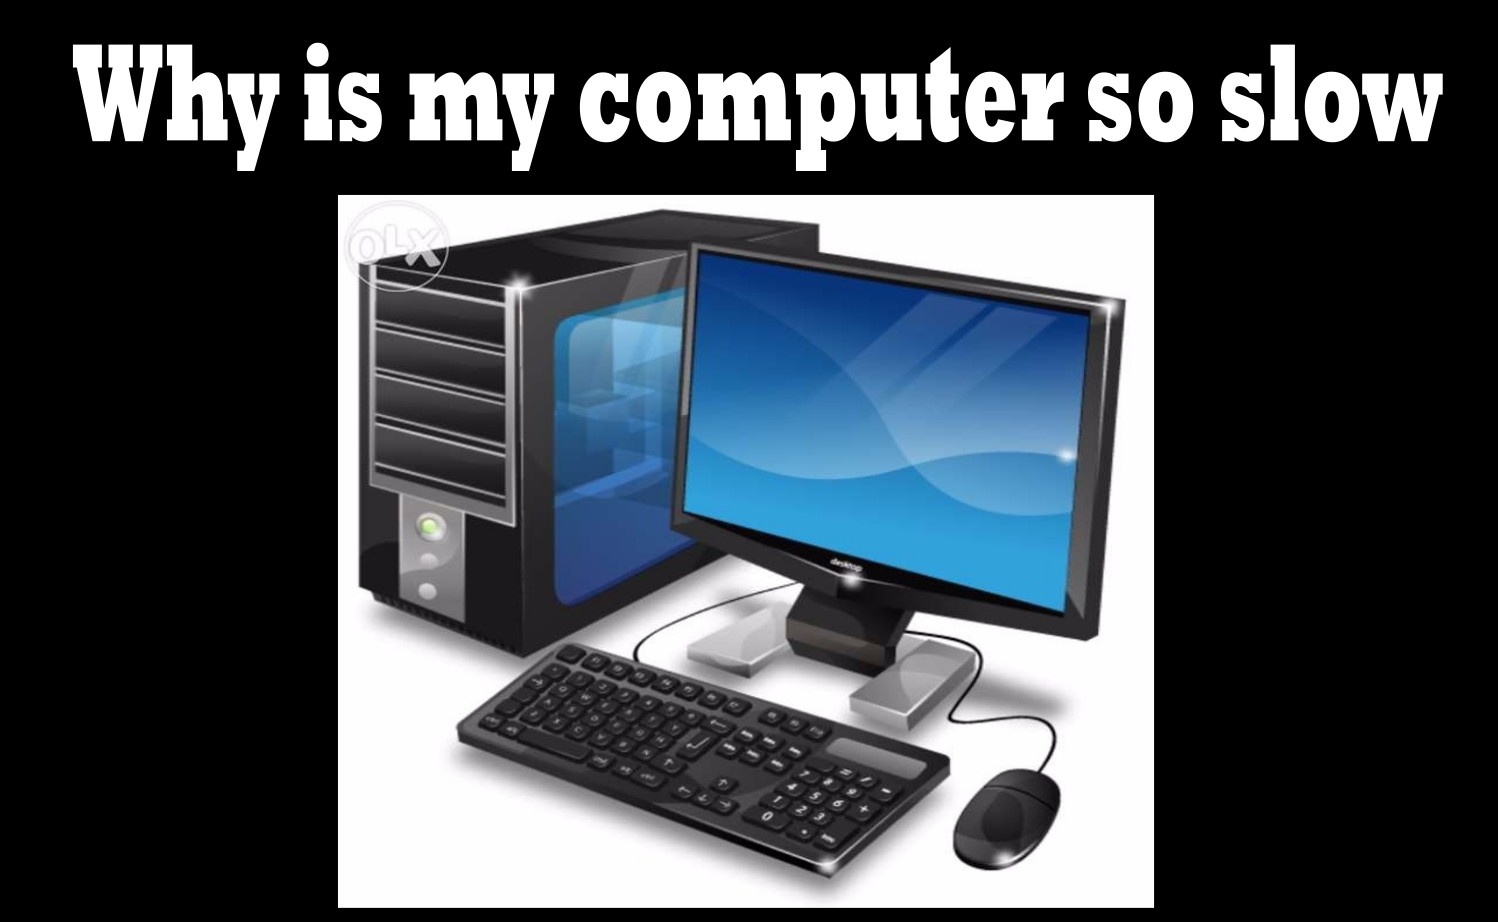 Why is my computer so slow